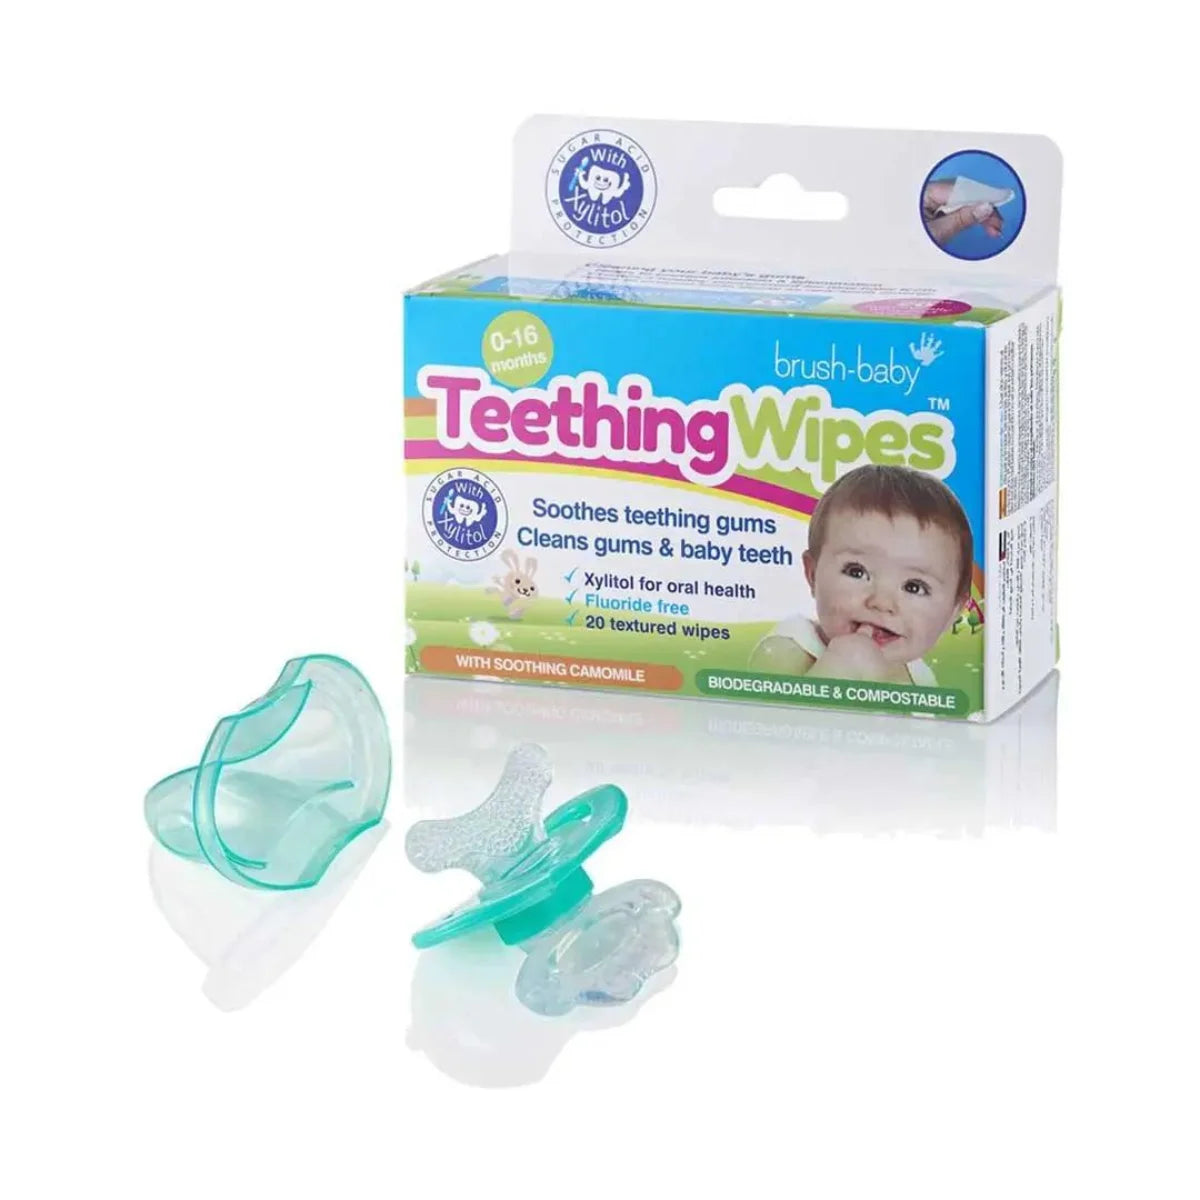 brush baby teething wipes and front ease baby teether set